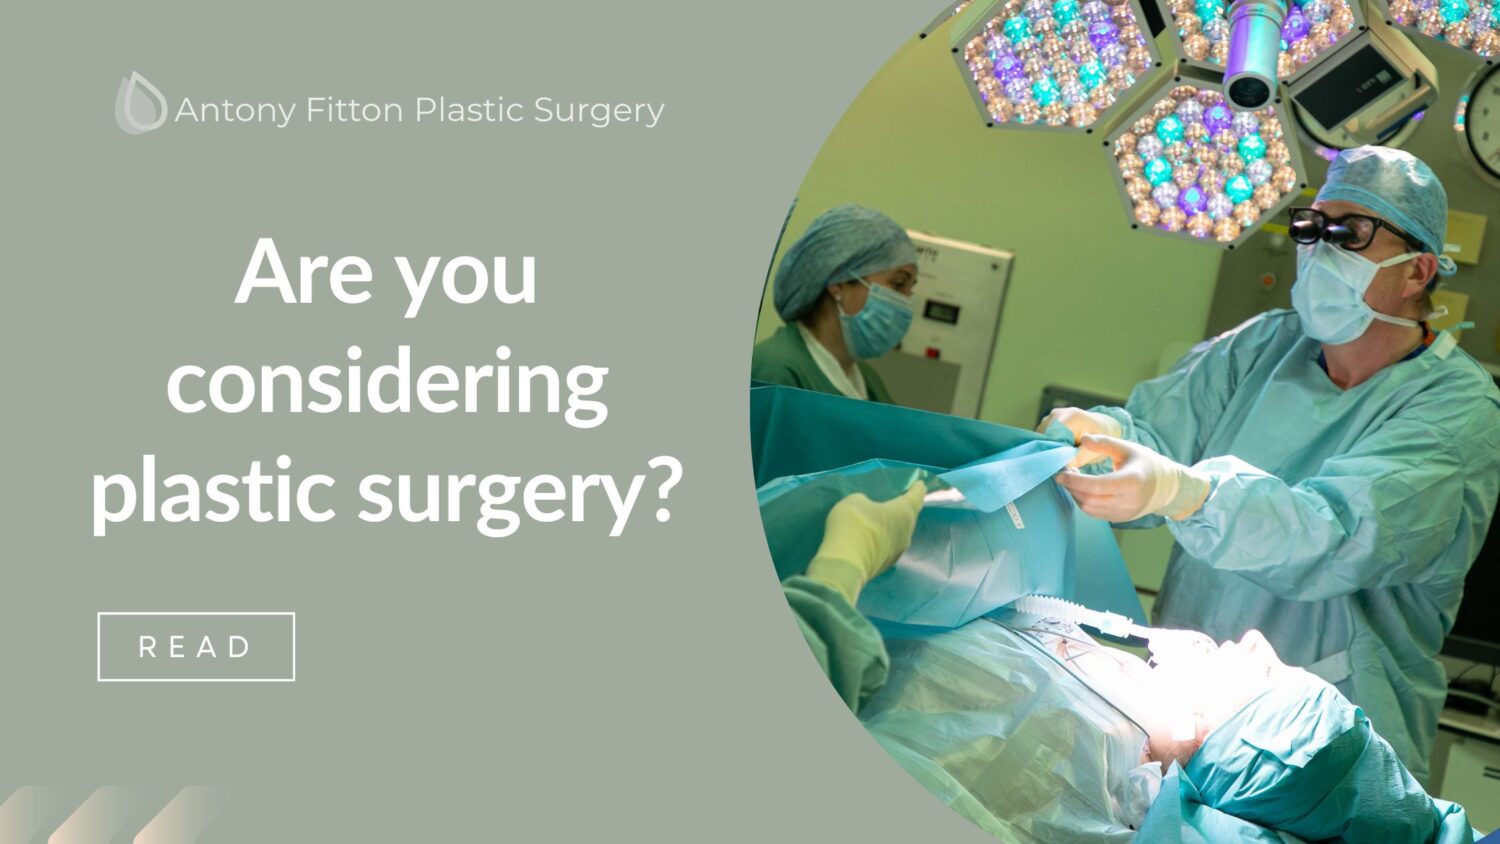 Are you considering plastic surgery?